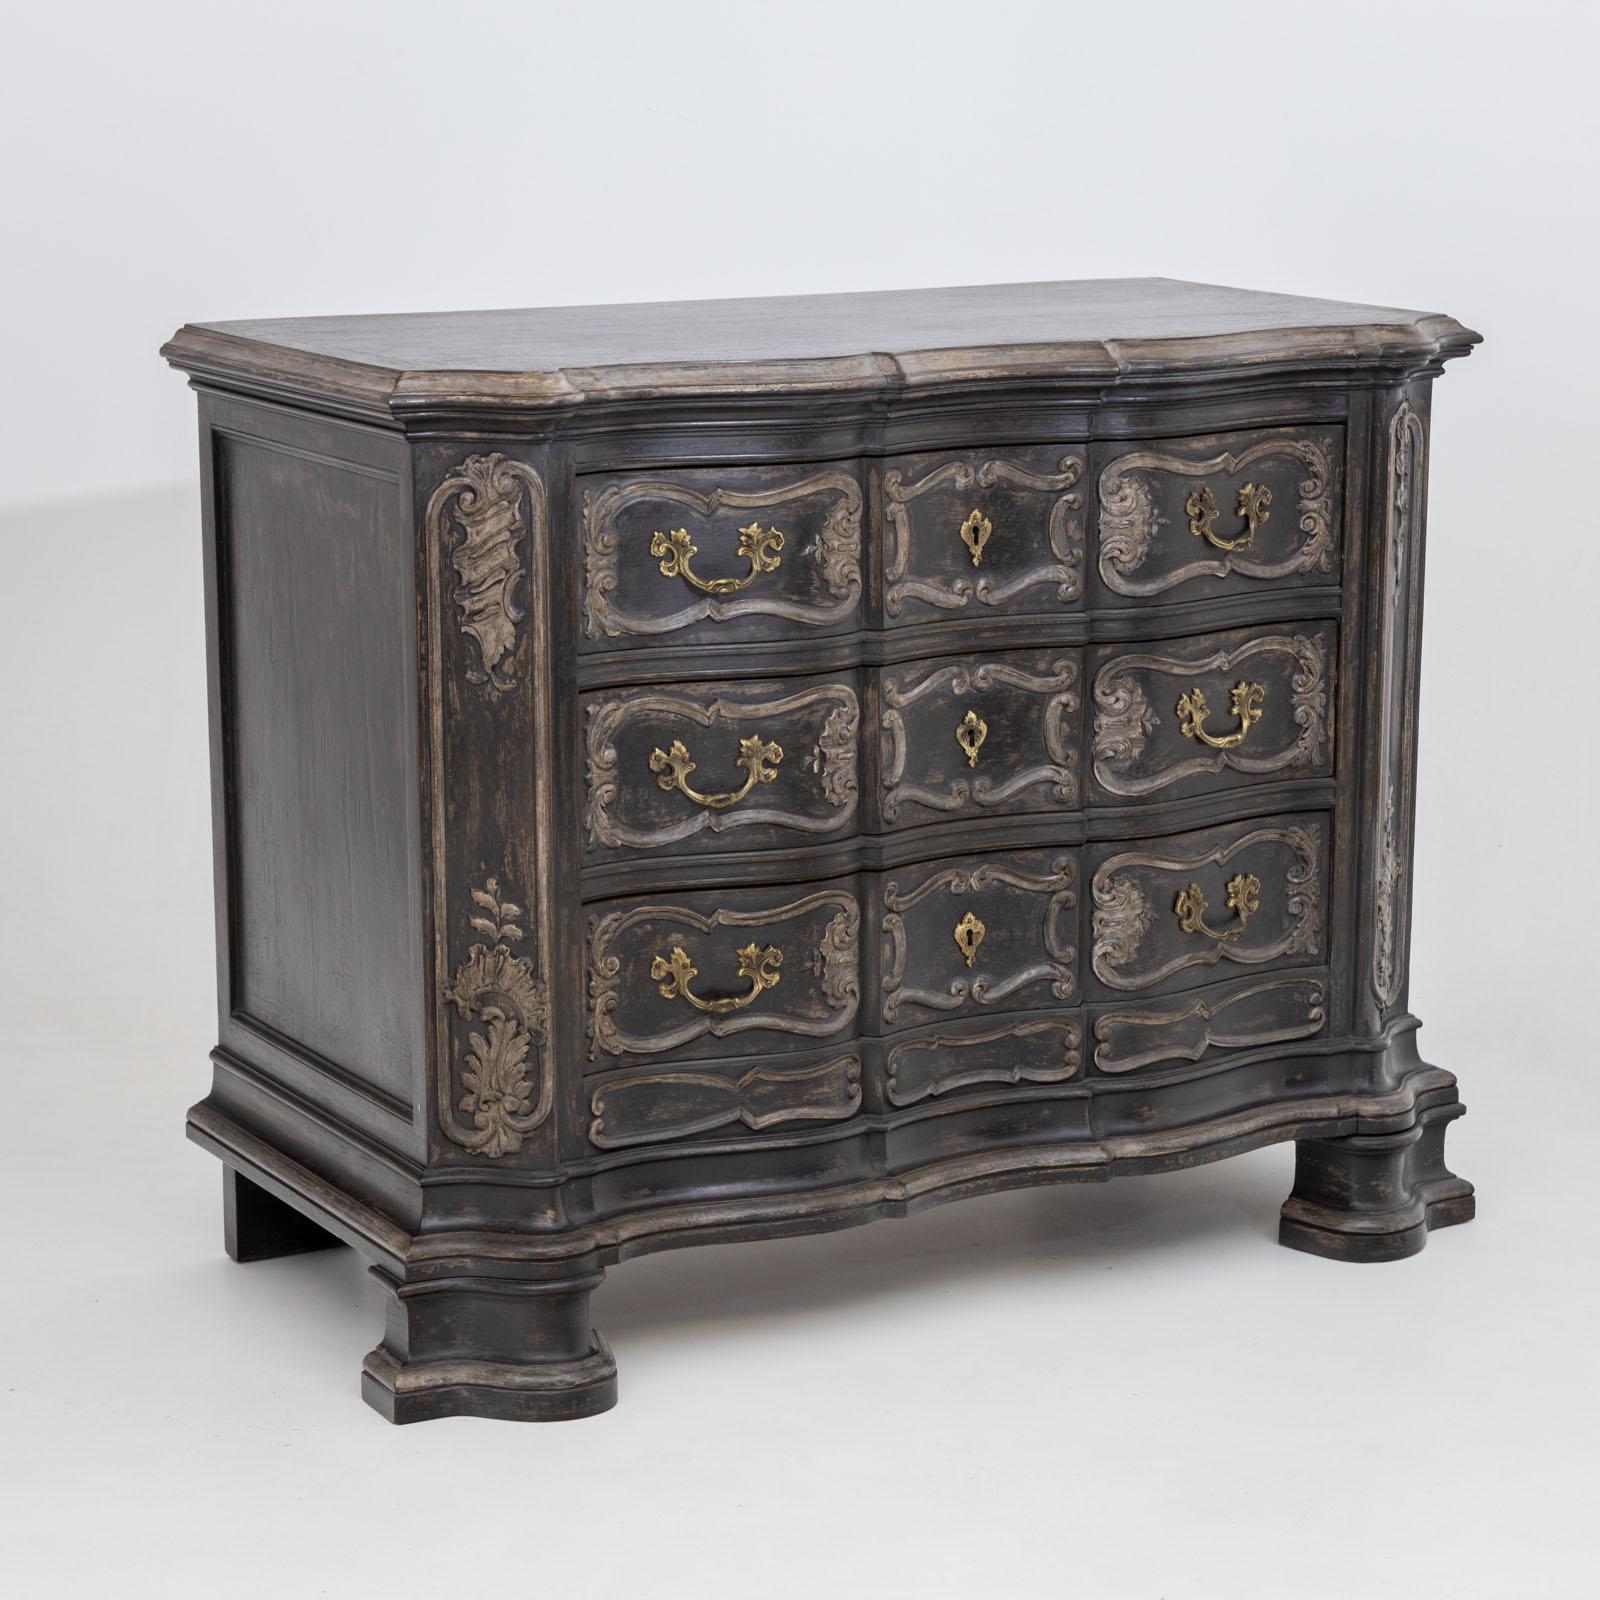 Baroque-style Chest of Drawers in Anthracite Grey In Good Condition For Sale In Greding, DE